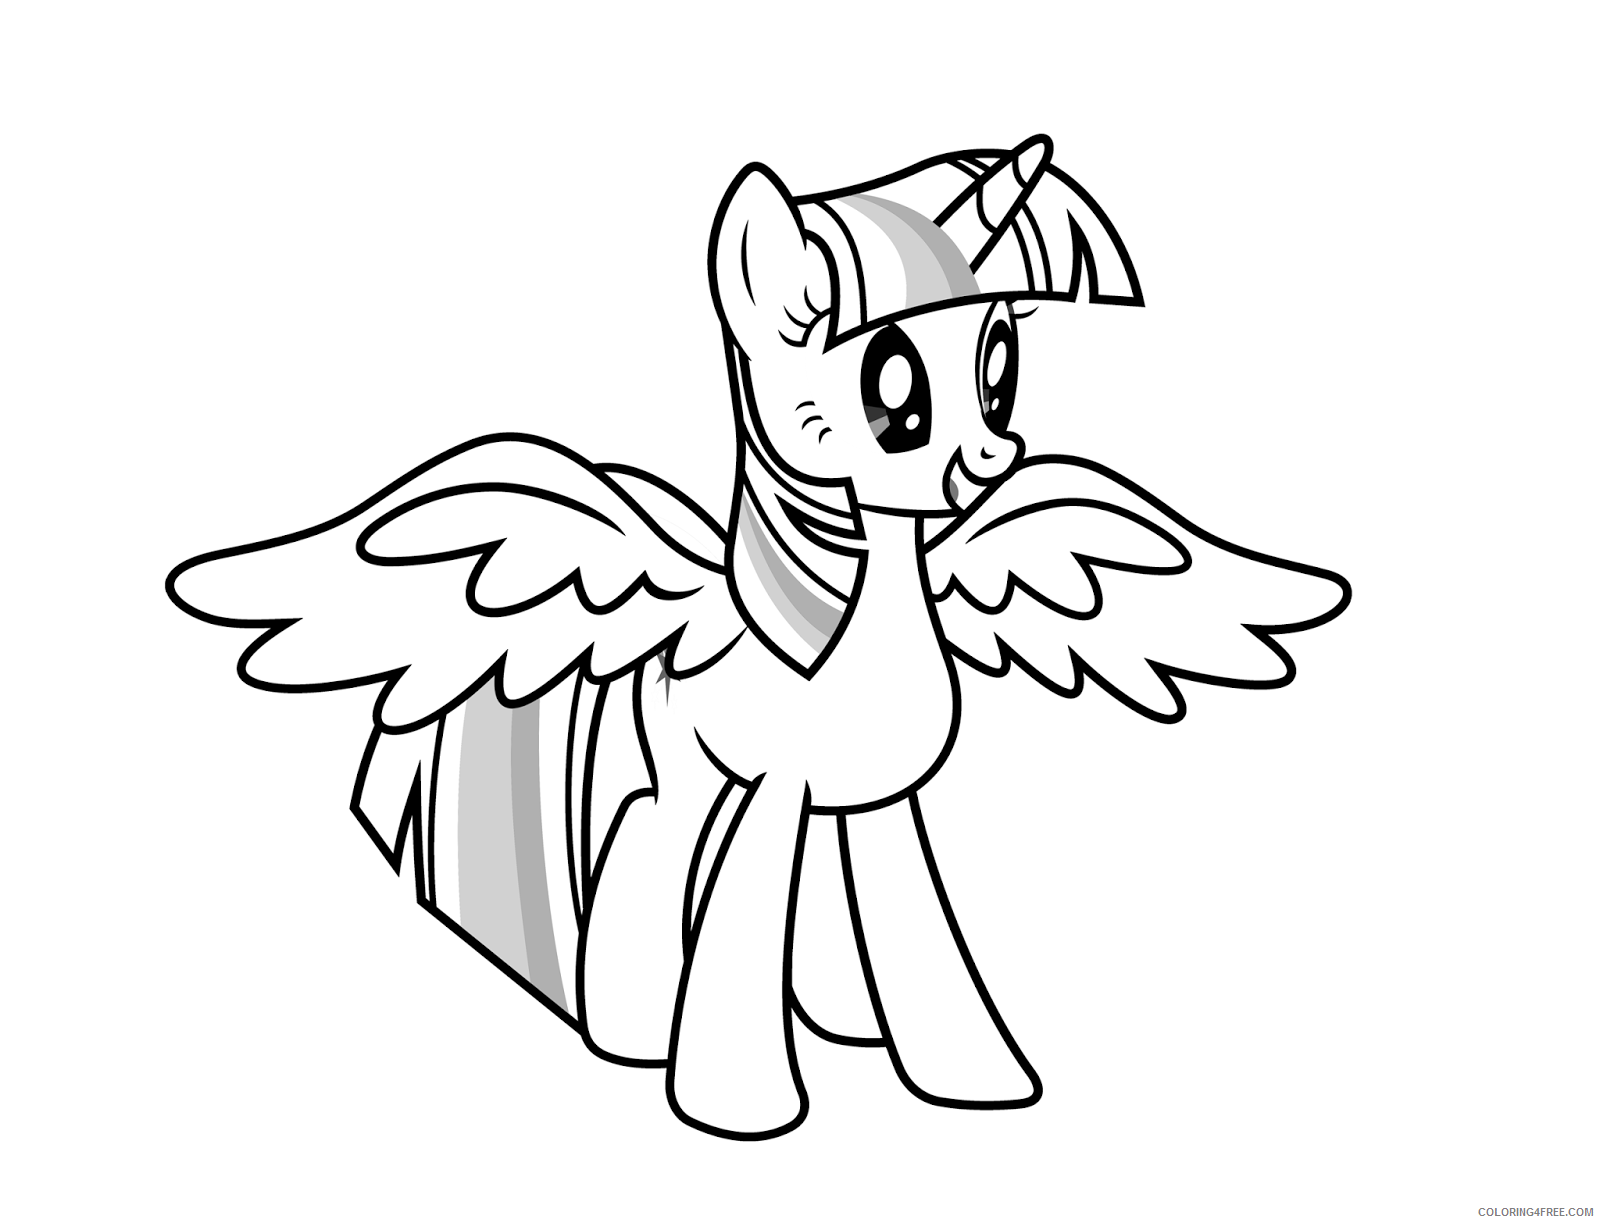 Twilight Sparkle Coloring Pages Twilight Sparkle 1 Printable 2021 5990 Coloring4free